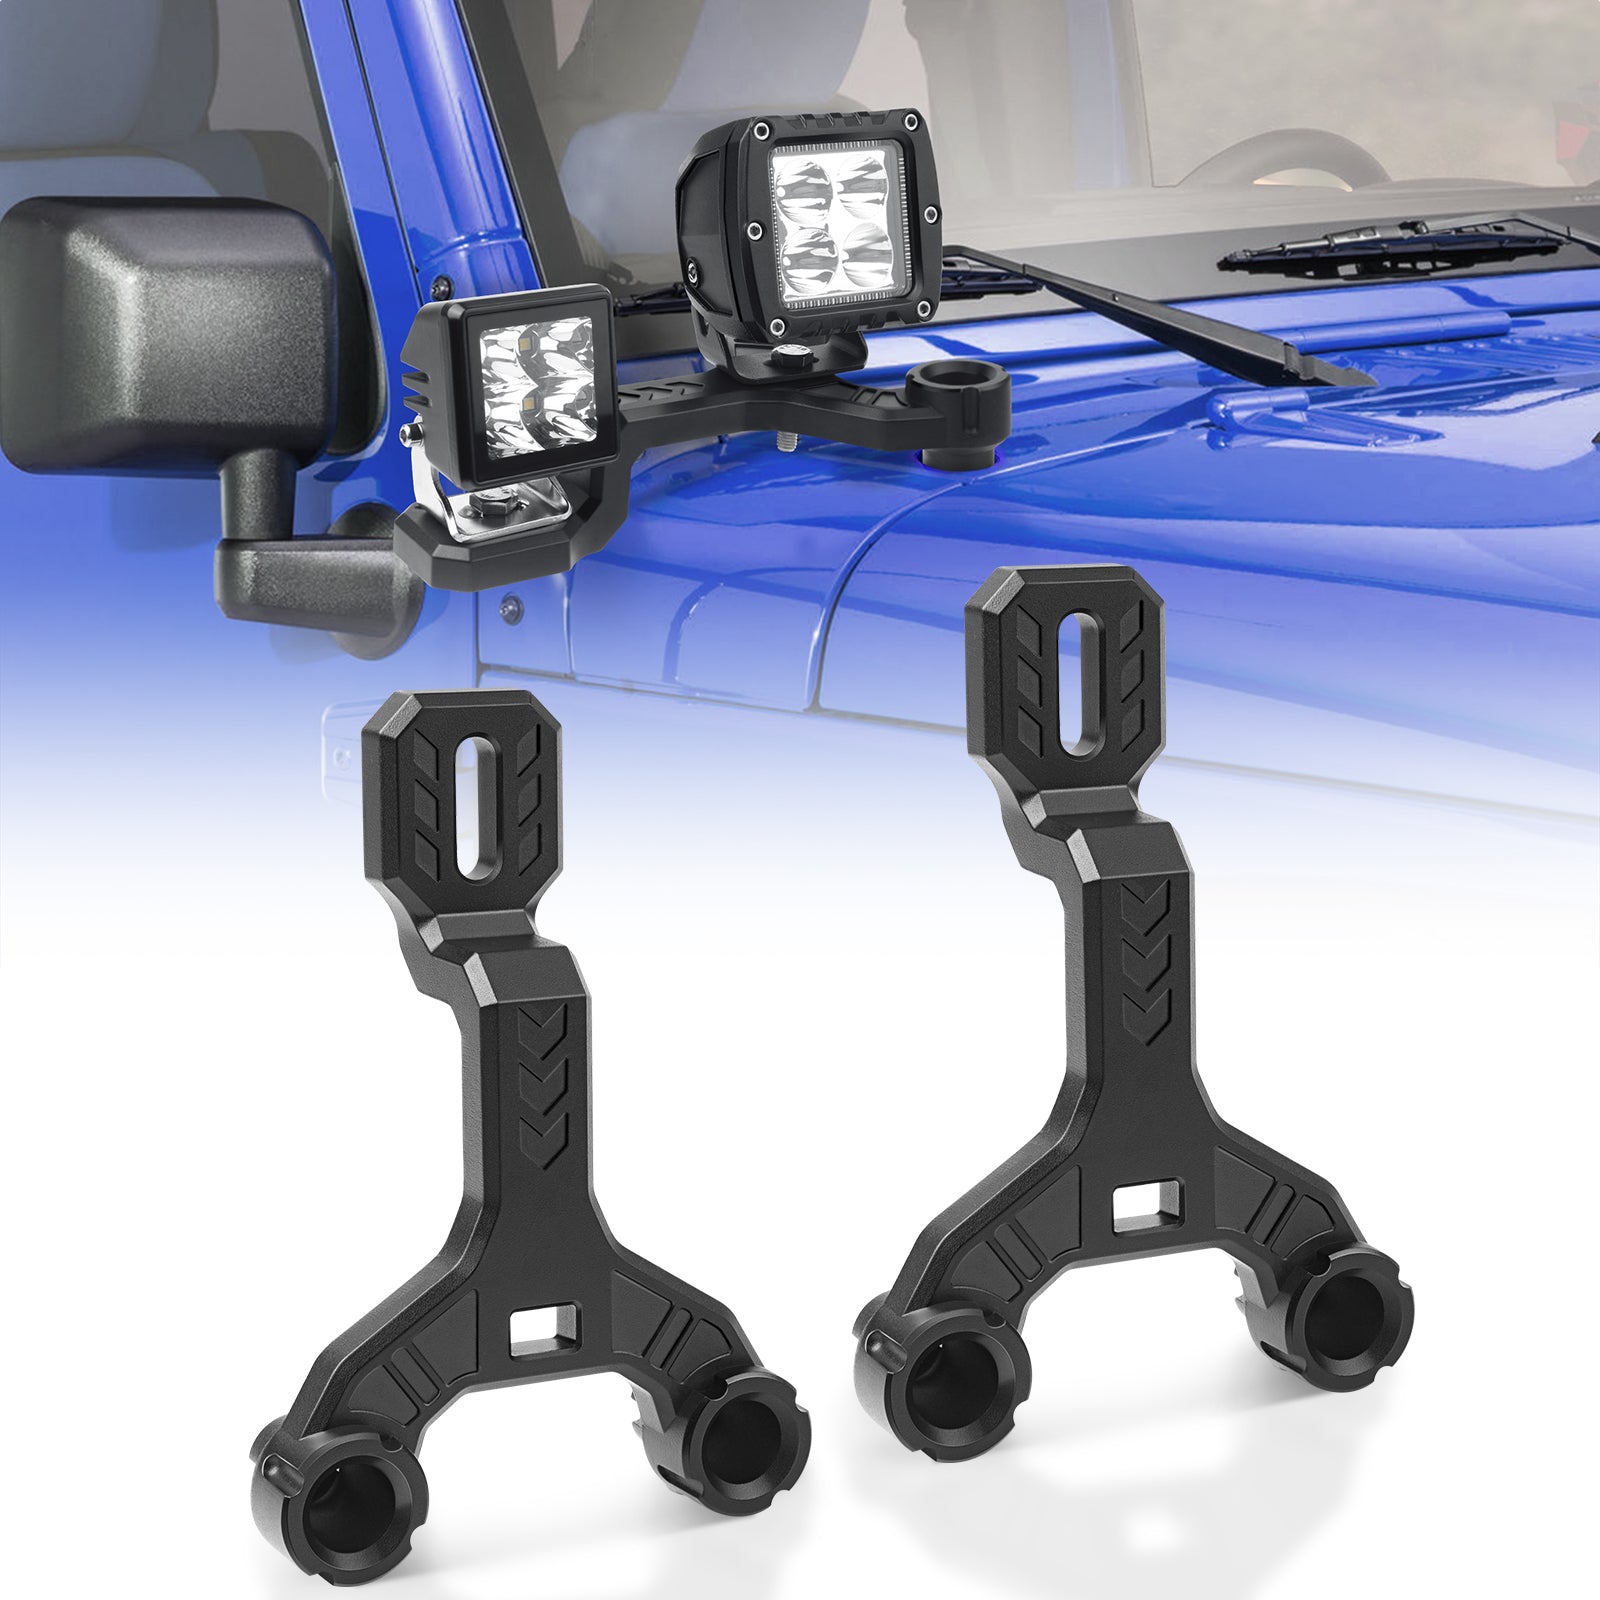 MICTUNING Dual A-Pillar Light Brackets Lower Windshield Hinge Mounting Brackets for Offroad Light LED Pods Work Lights